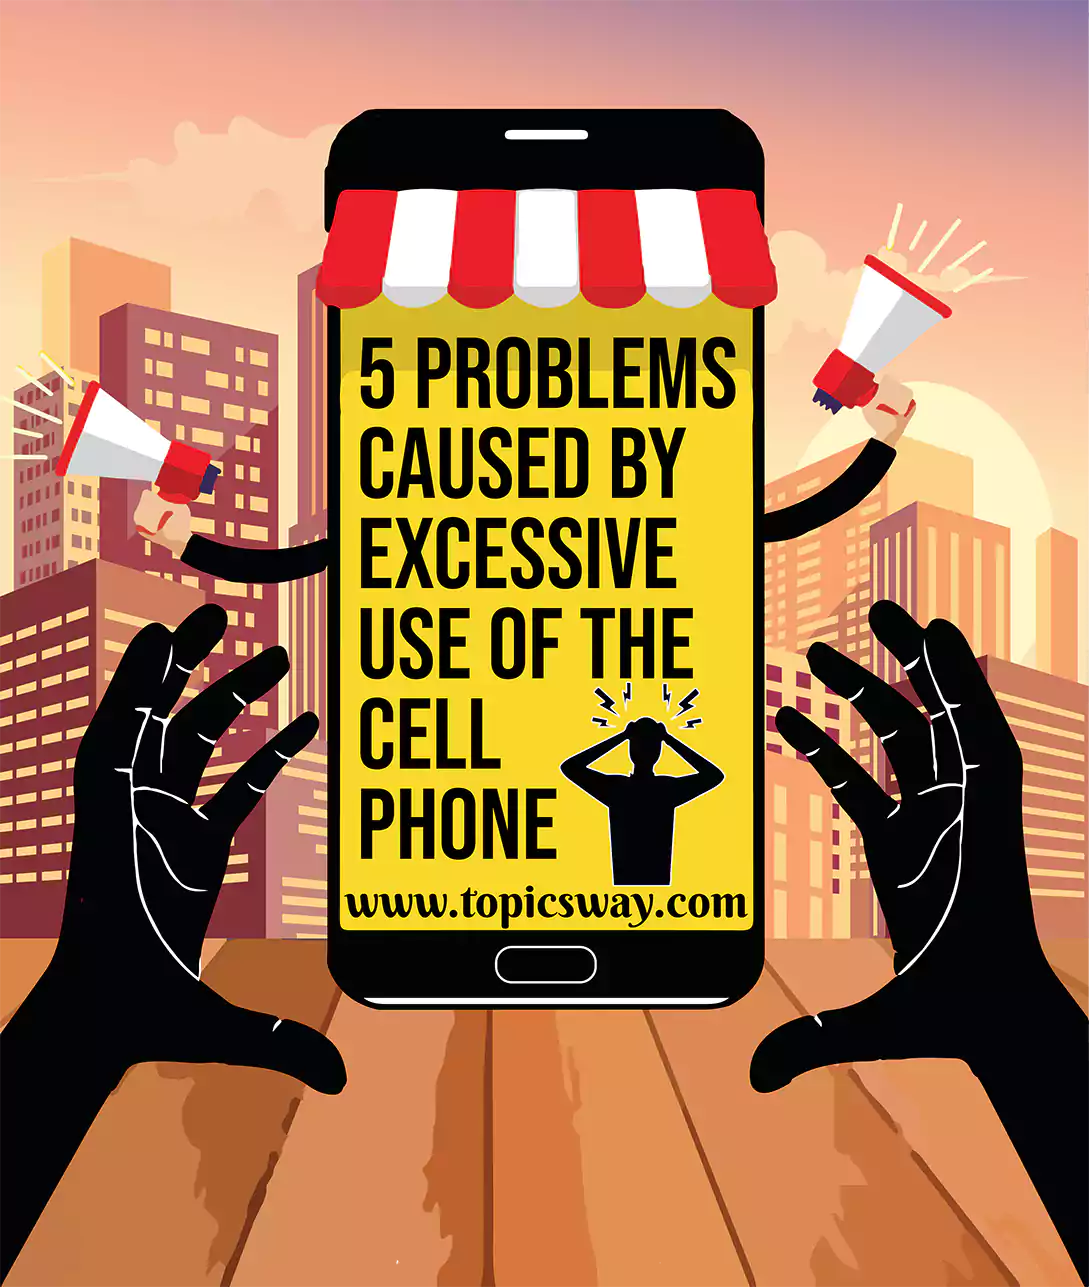 5-problems-caused-by-excessive-use-of-the-cell-phone